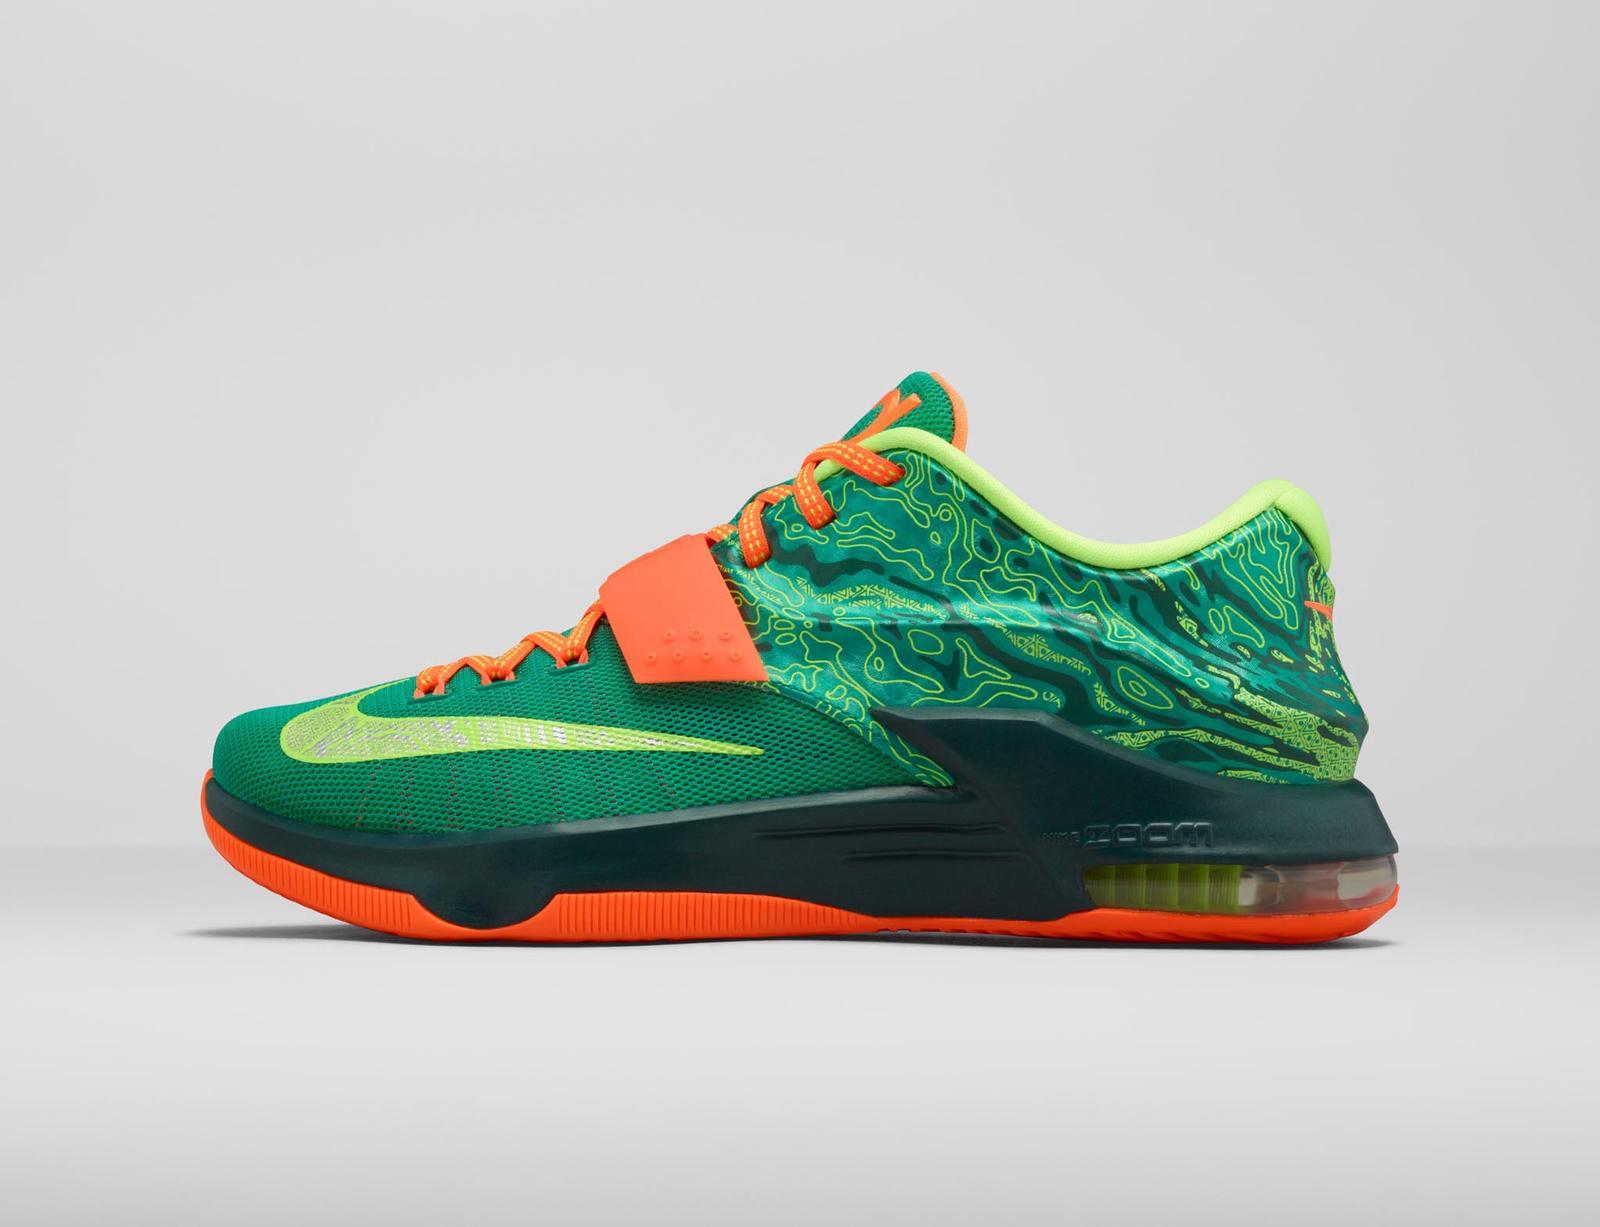 KD7 Weatherman Shoe Brings Heat to the Forecast